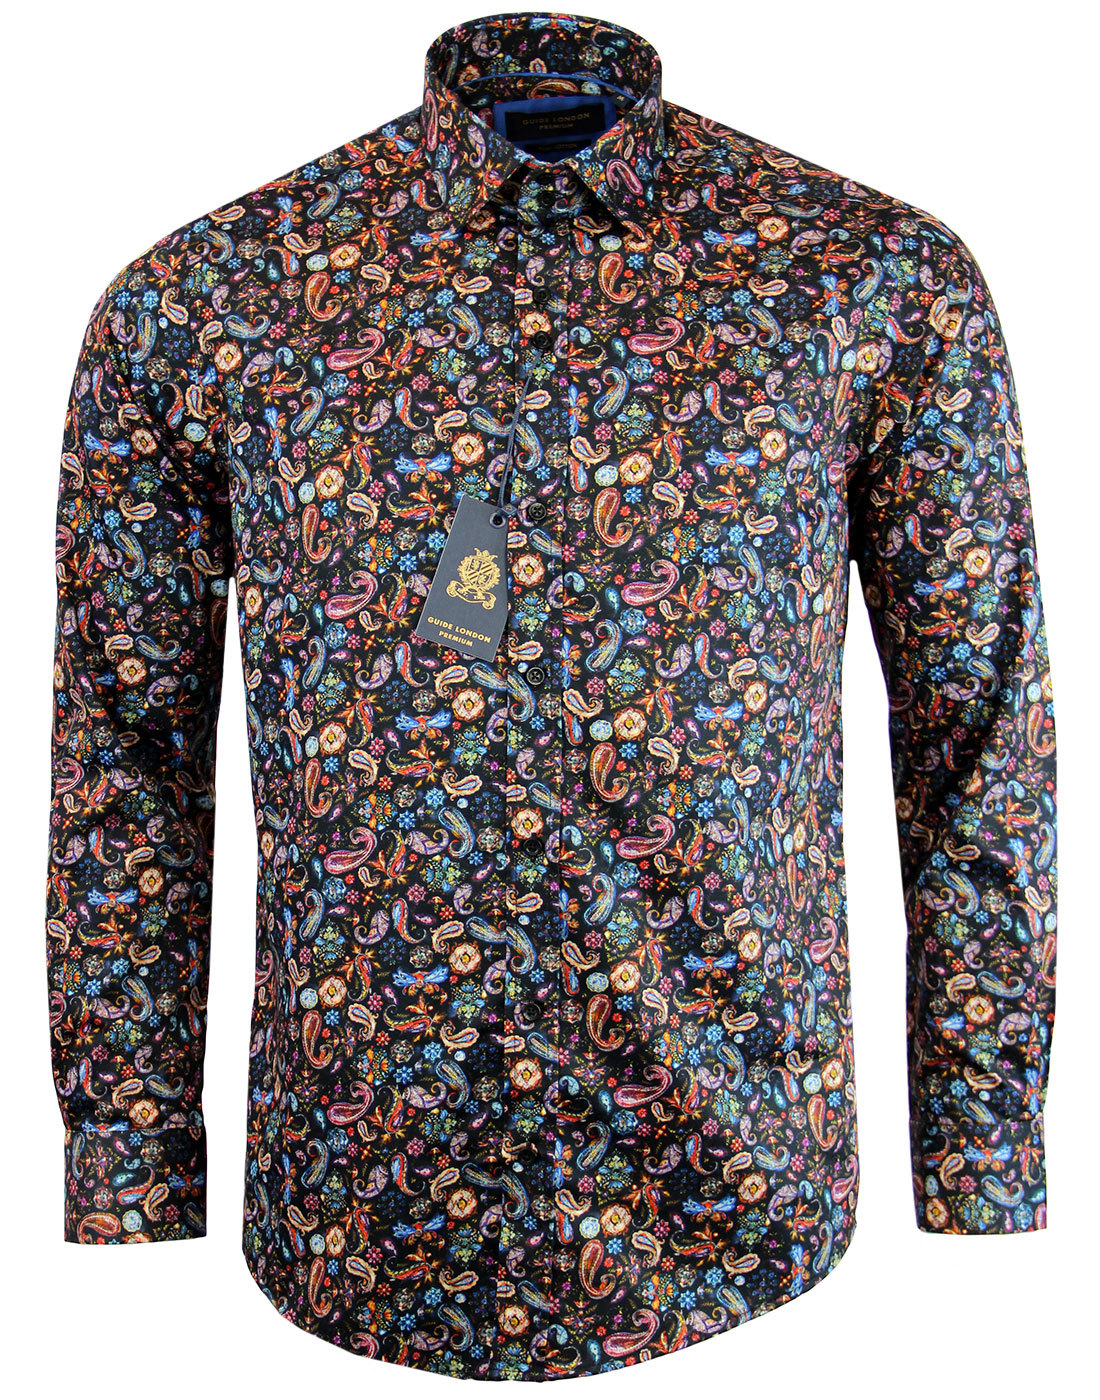 GUIDE LONDON 60s Psychedelic Painted Paisley Shirt